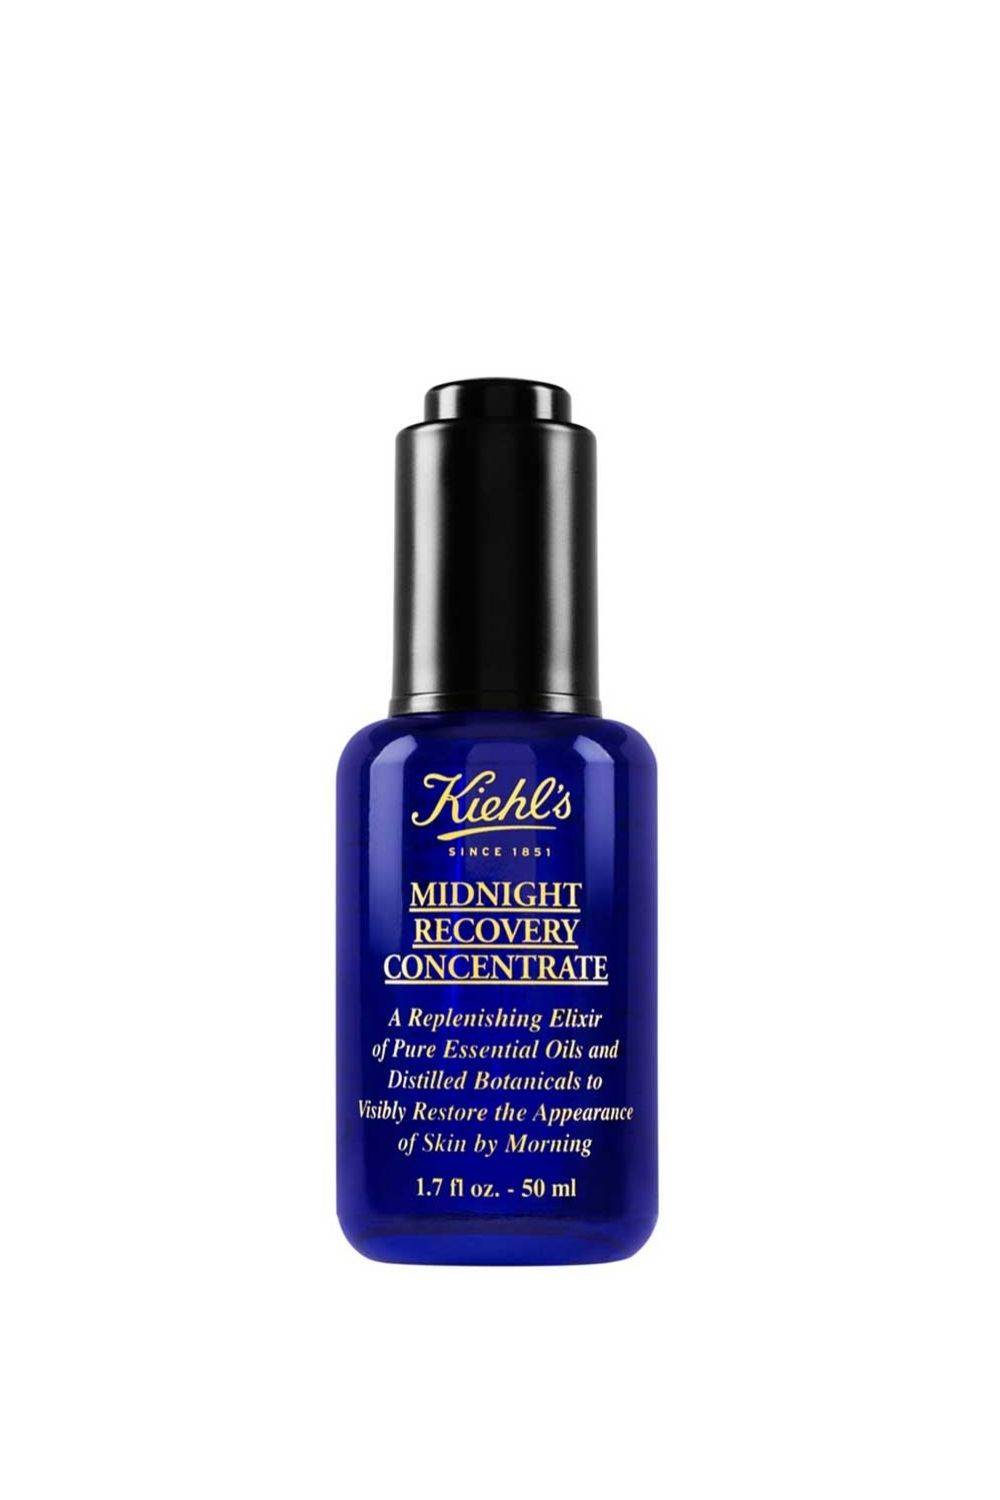 Midnight Recovery Concentrate de Kiehl's